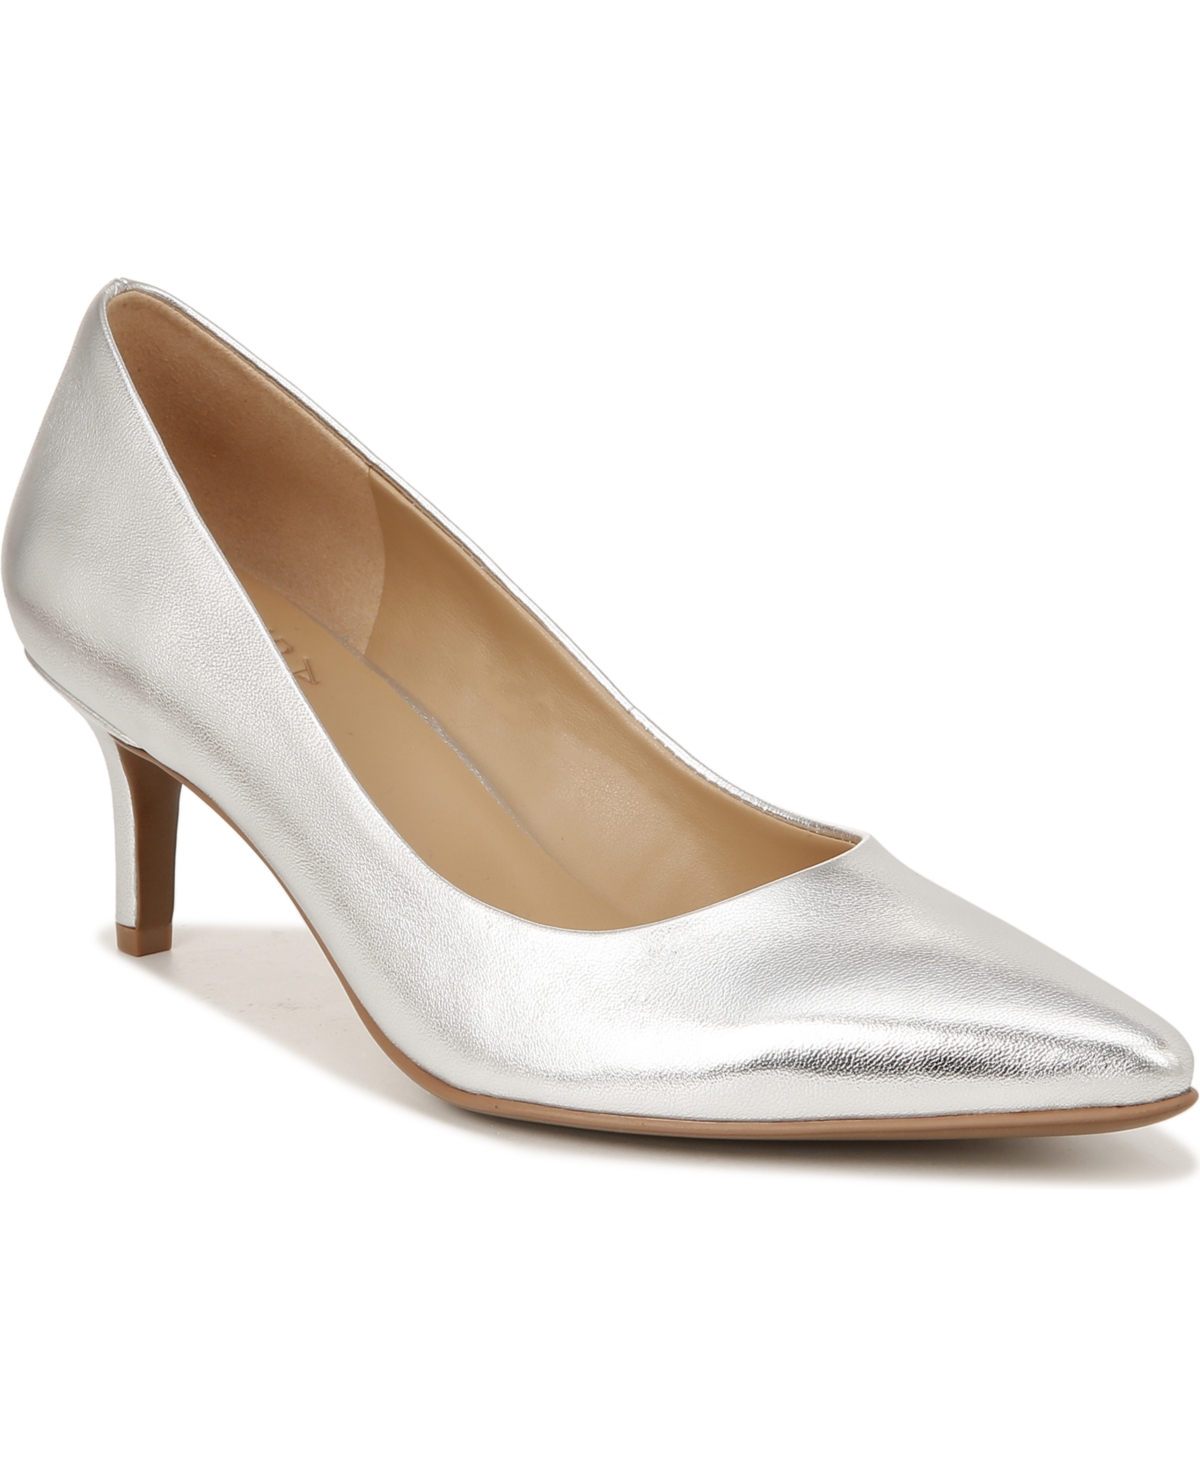 Naturalizer Everly Pumps In Silver Metallic Leather